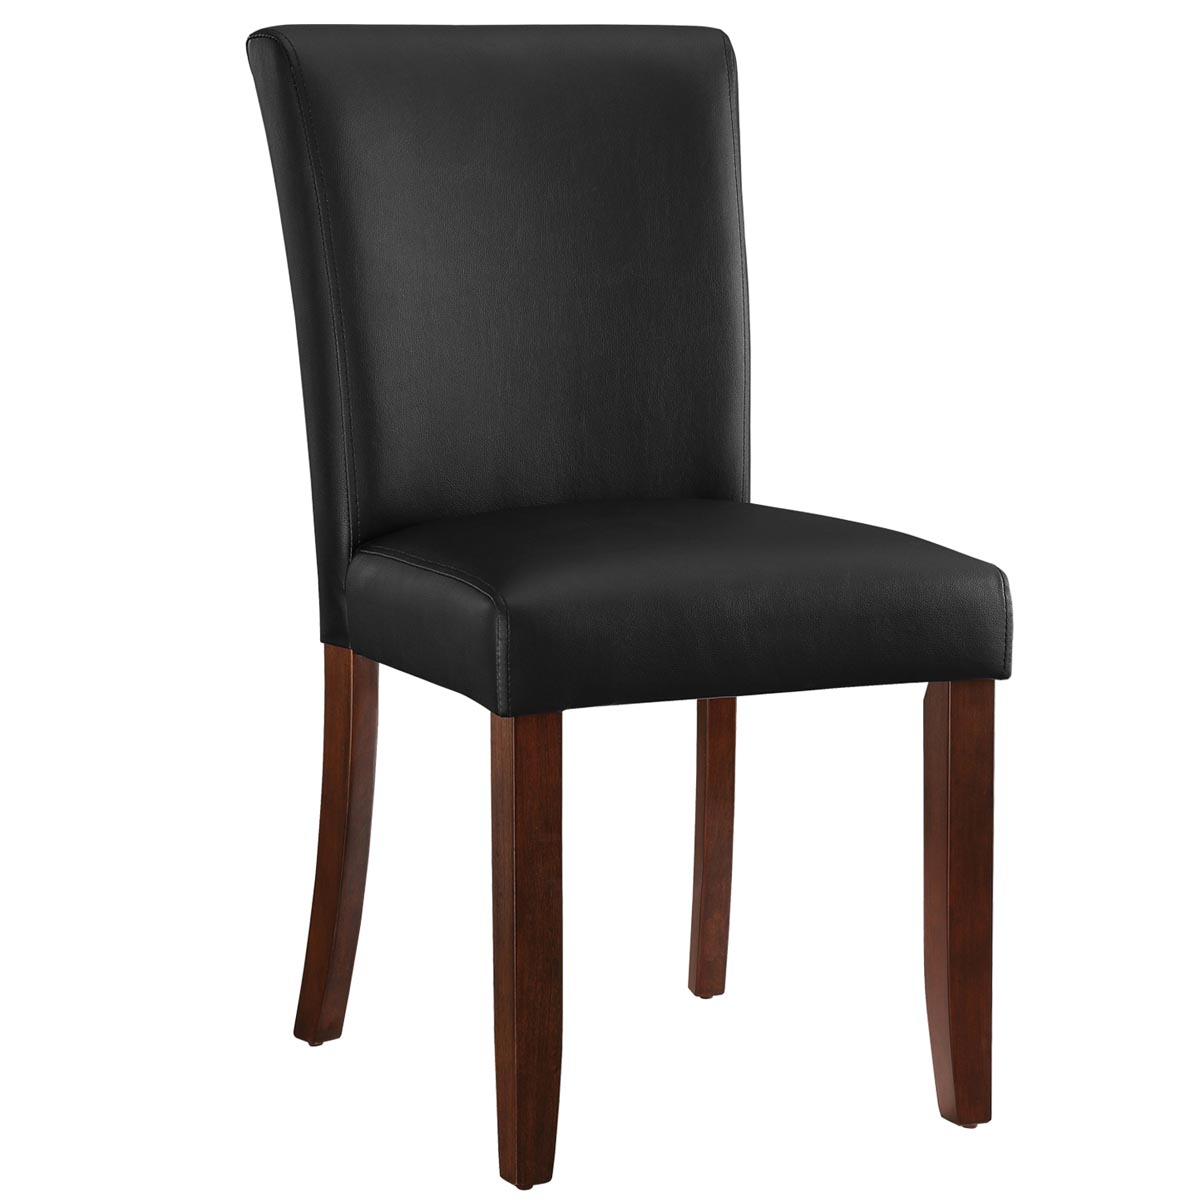 Optional Cappuccino Dining Chair